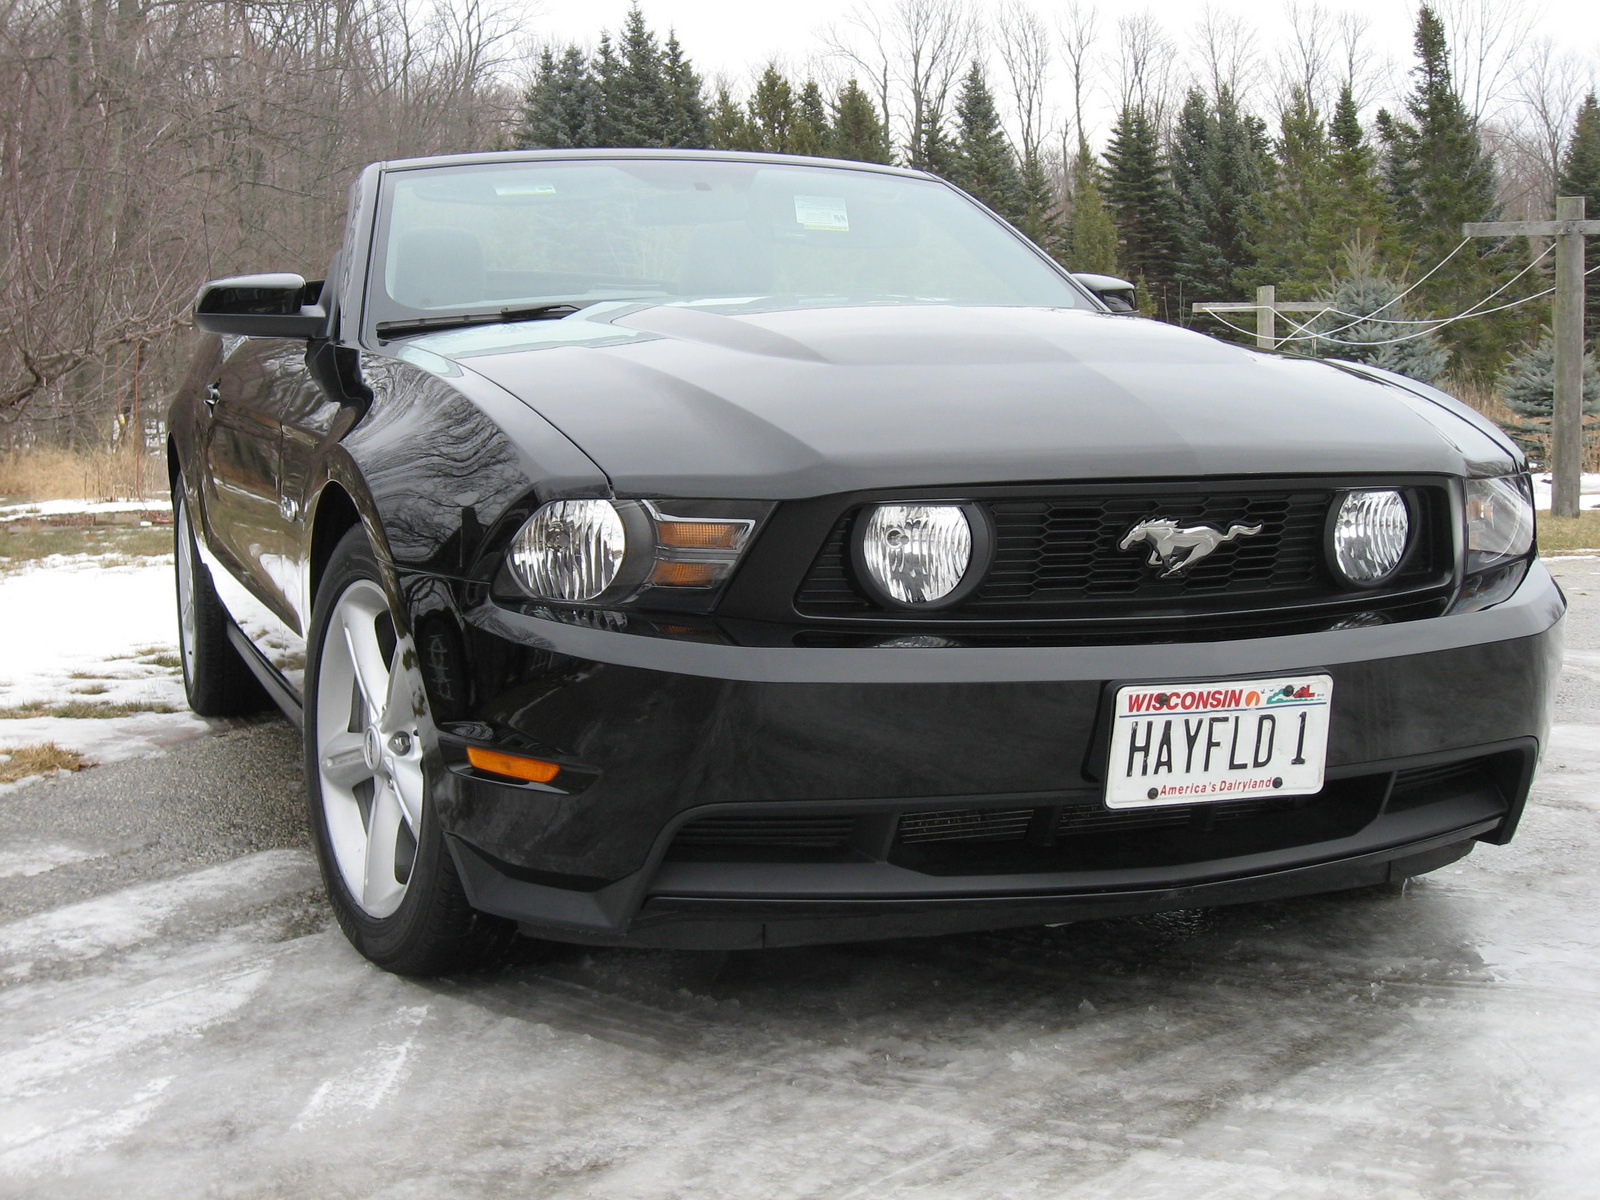 Used ford mustang gt convertibles sale #9